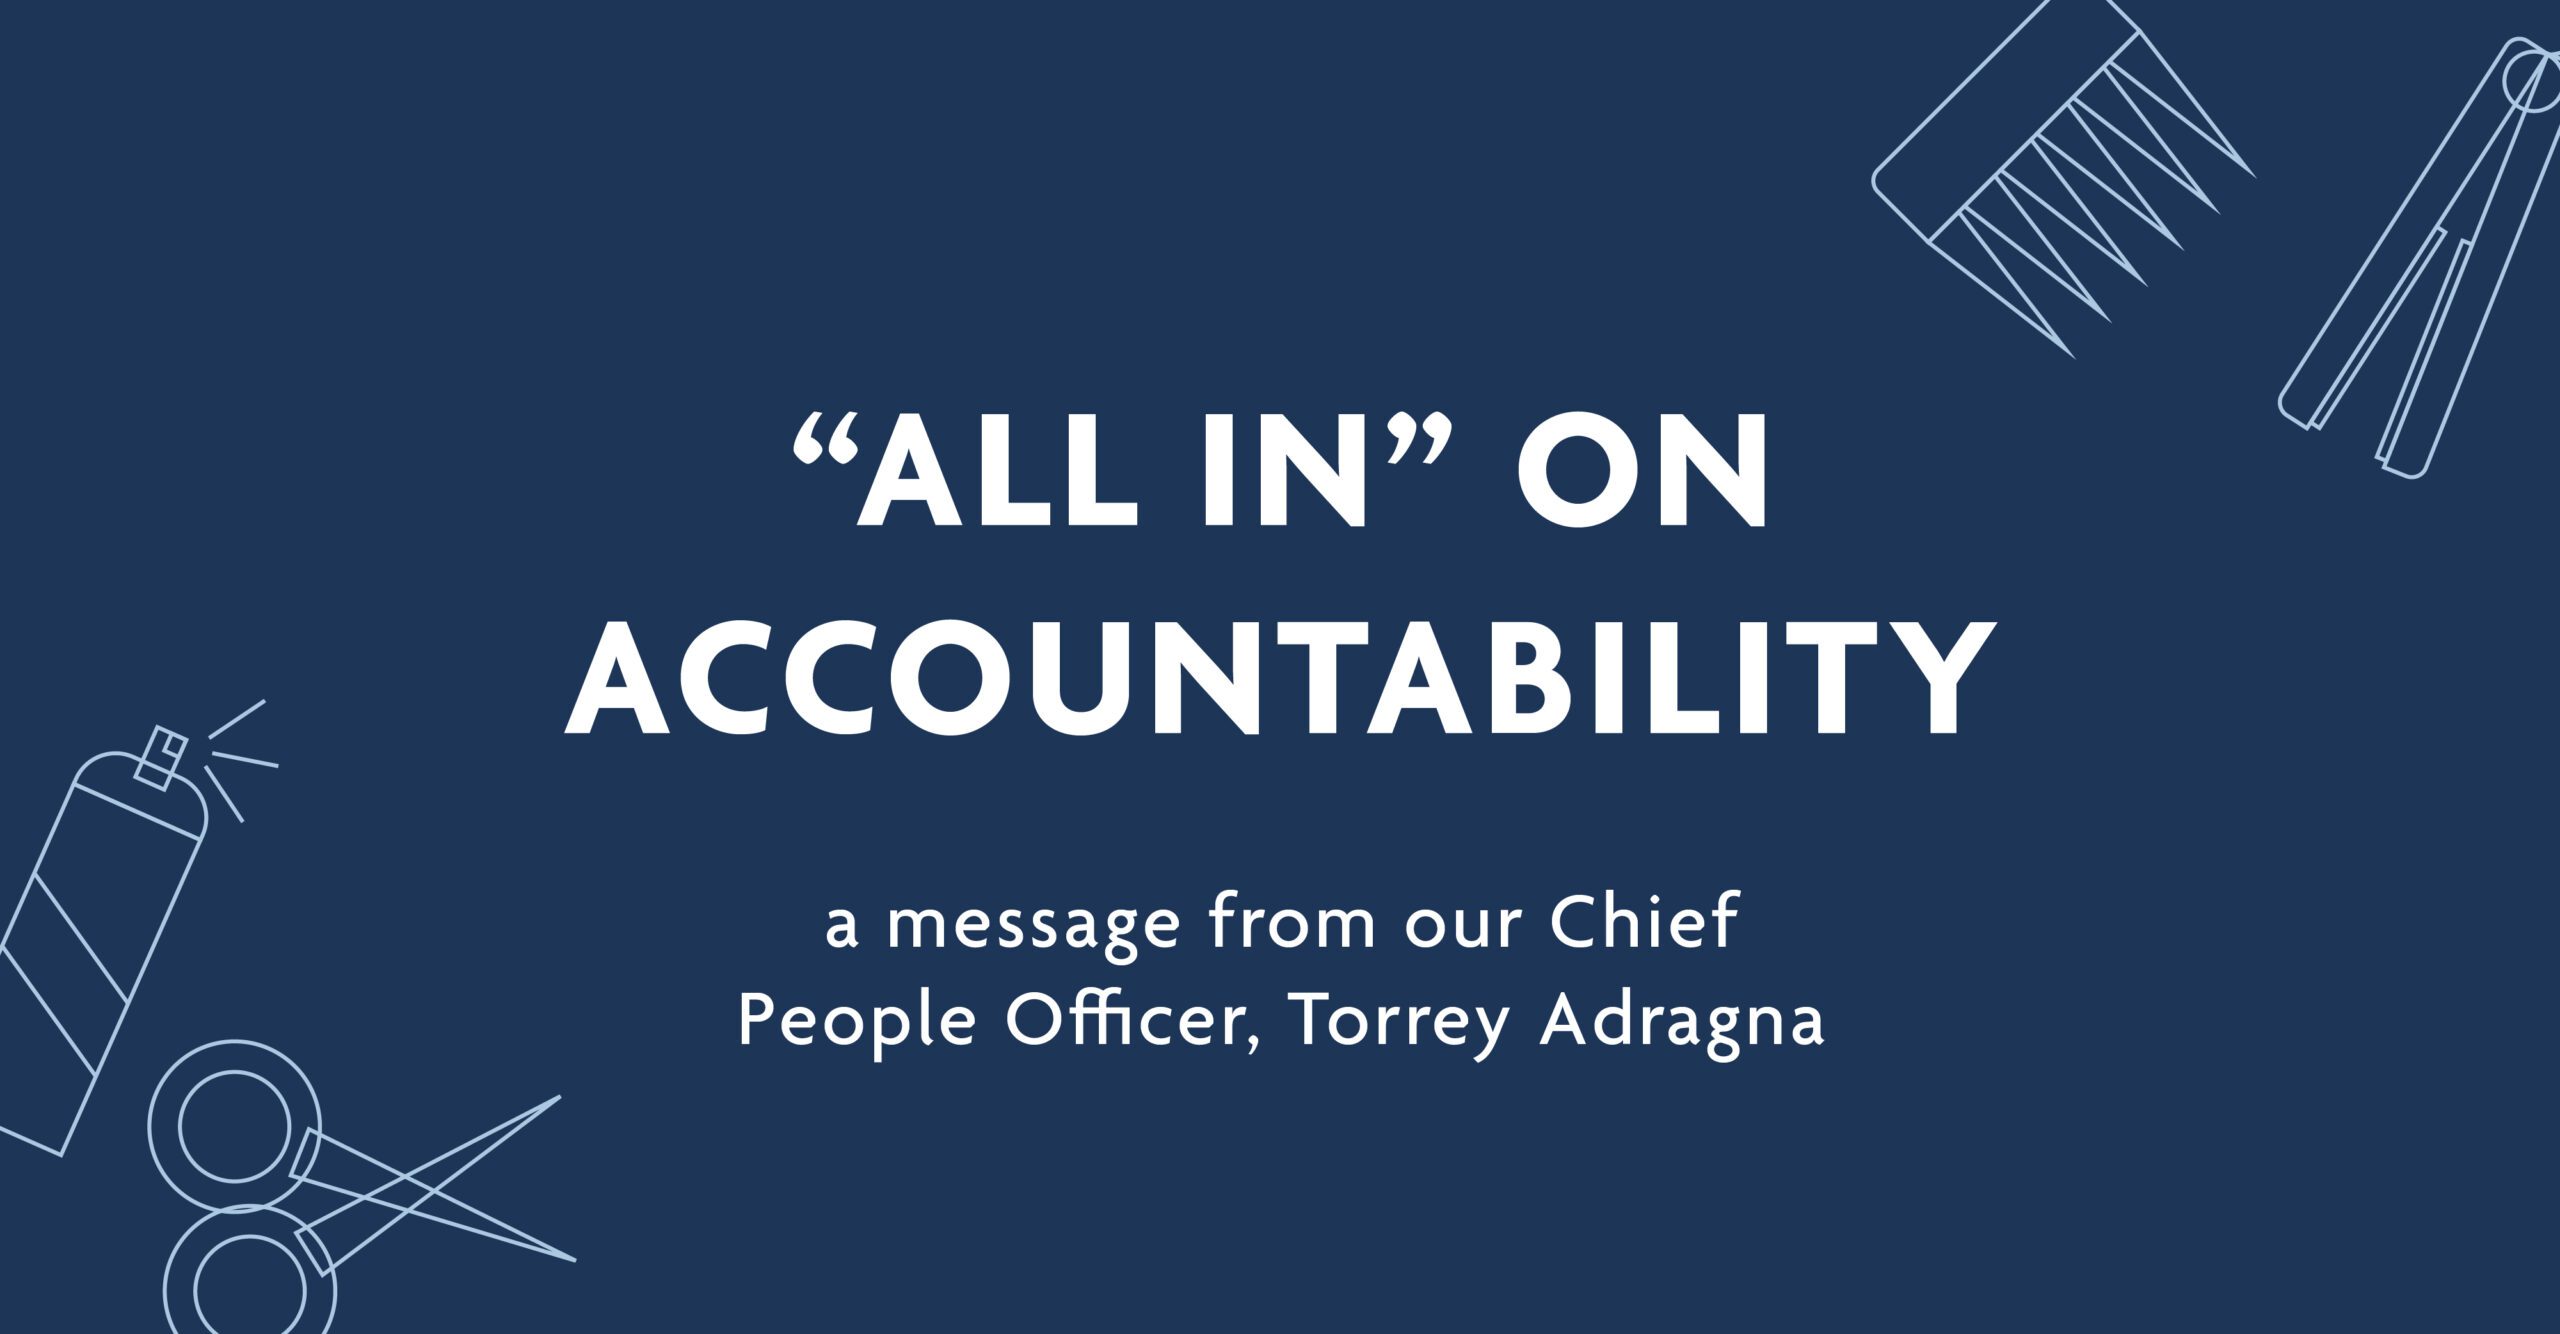 All in on Accountability